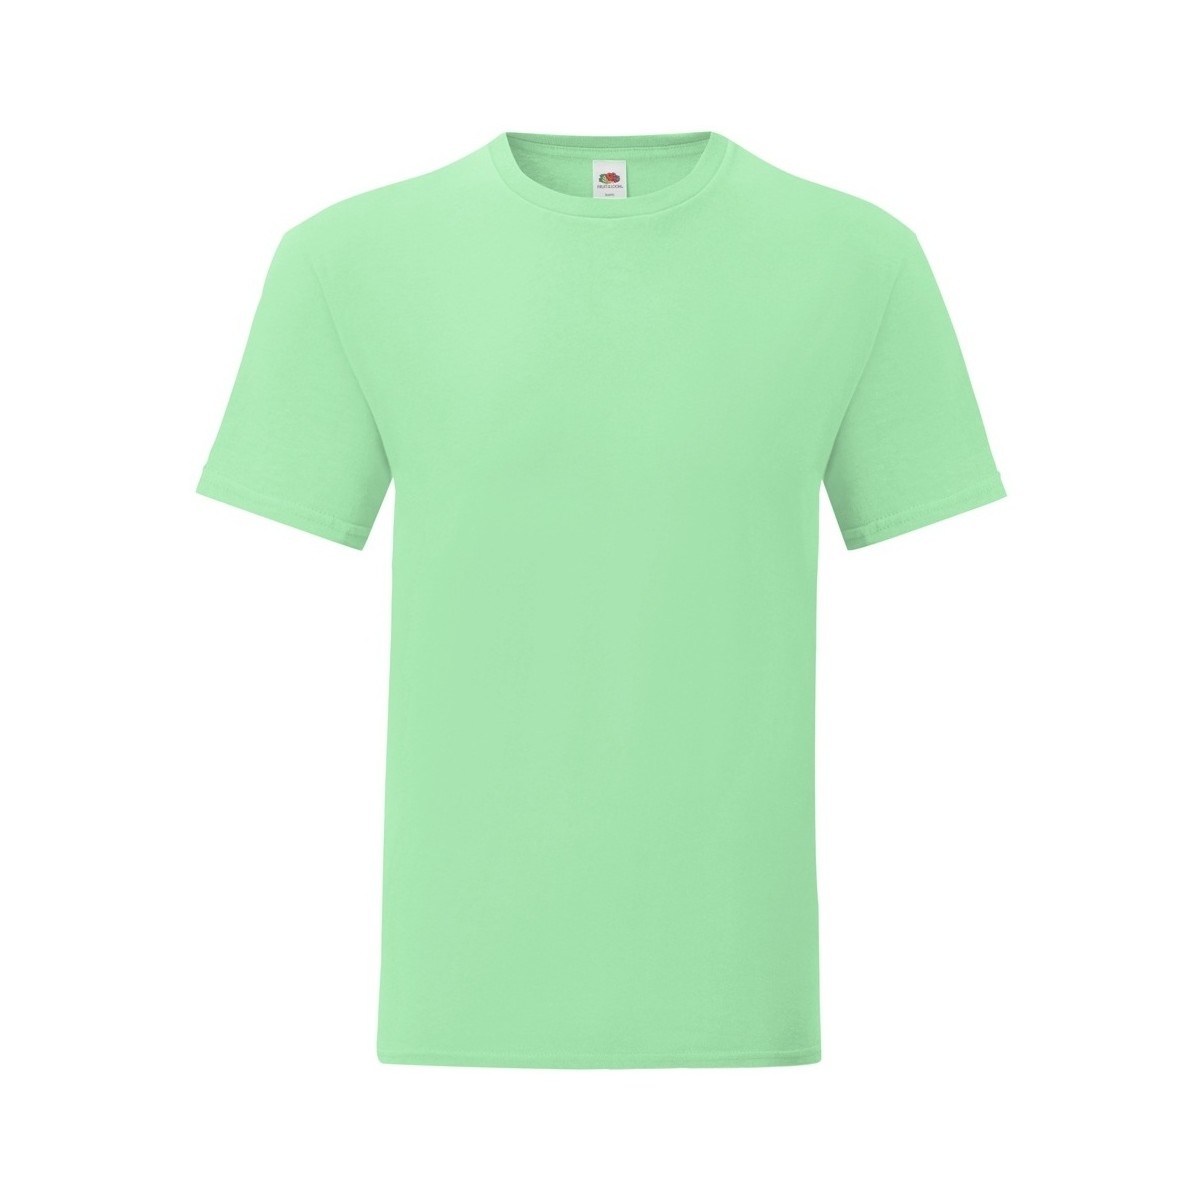 Vêtements Homme T-shirts manches longues Fruit Of The Loom Iconic 150 Vert